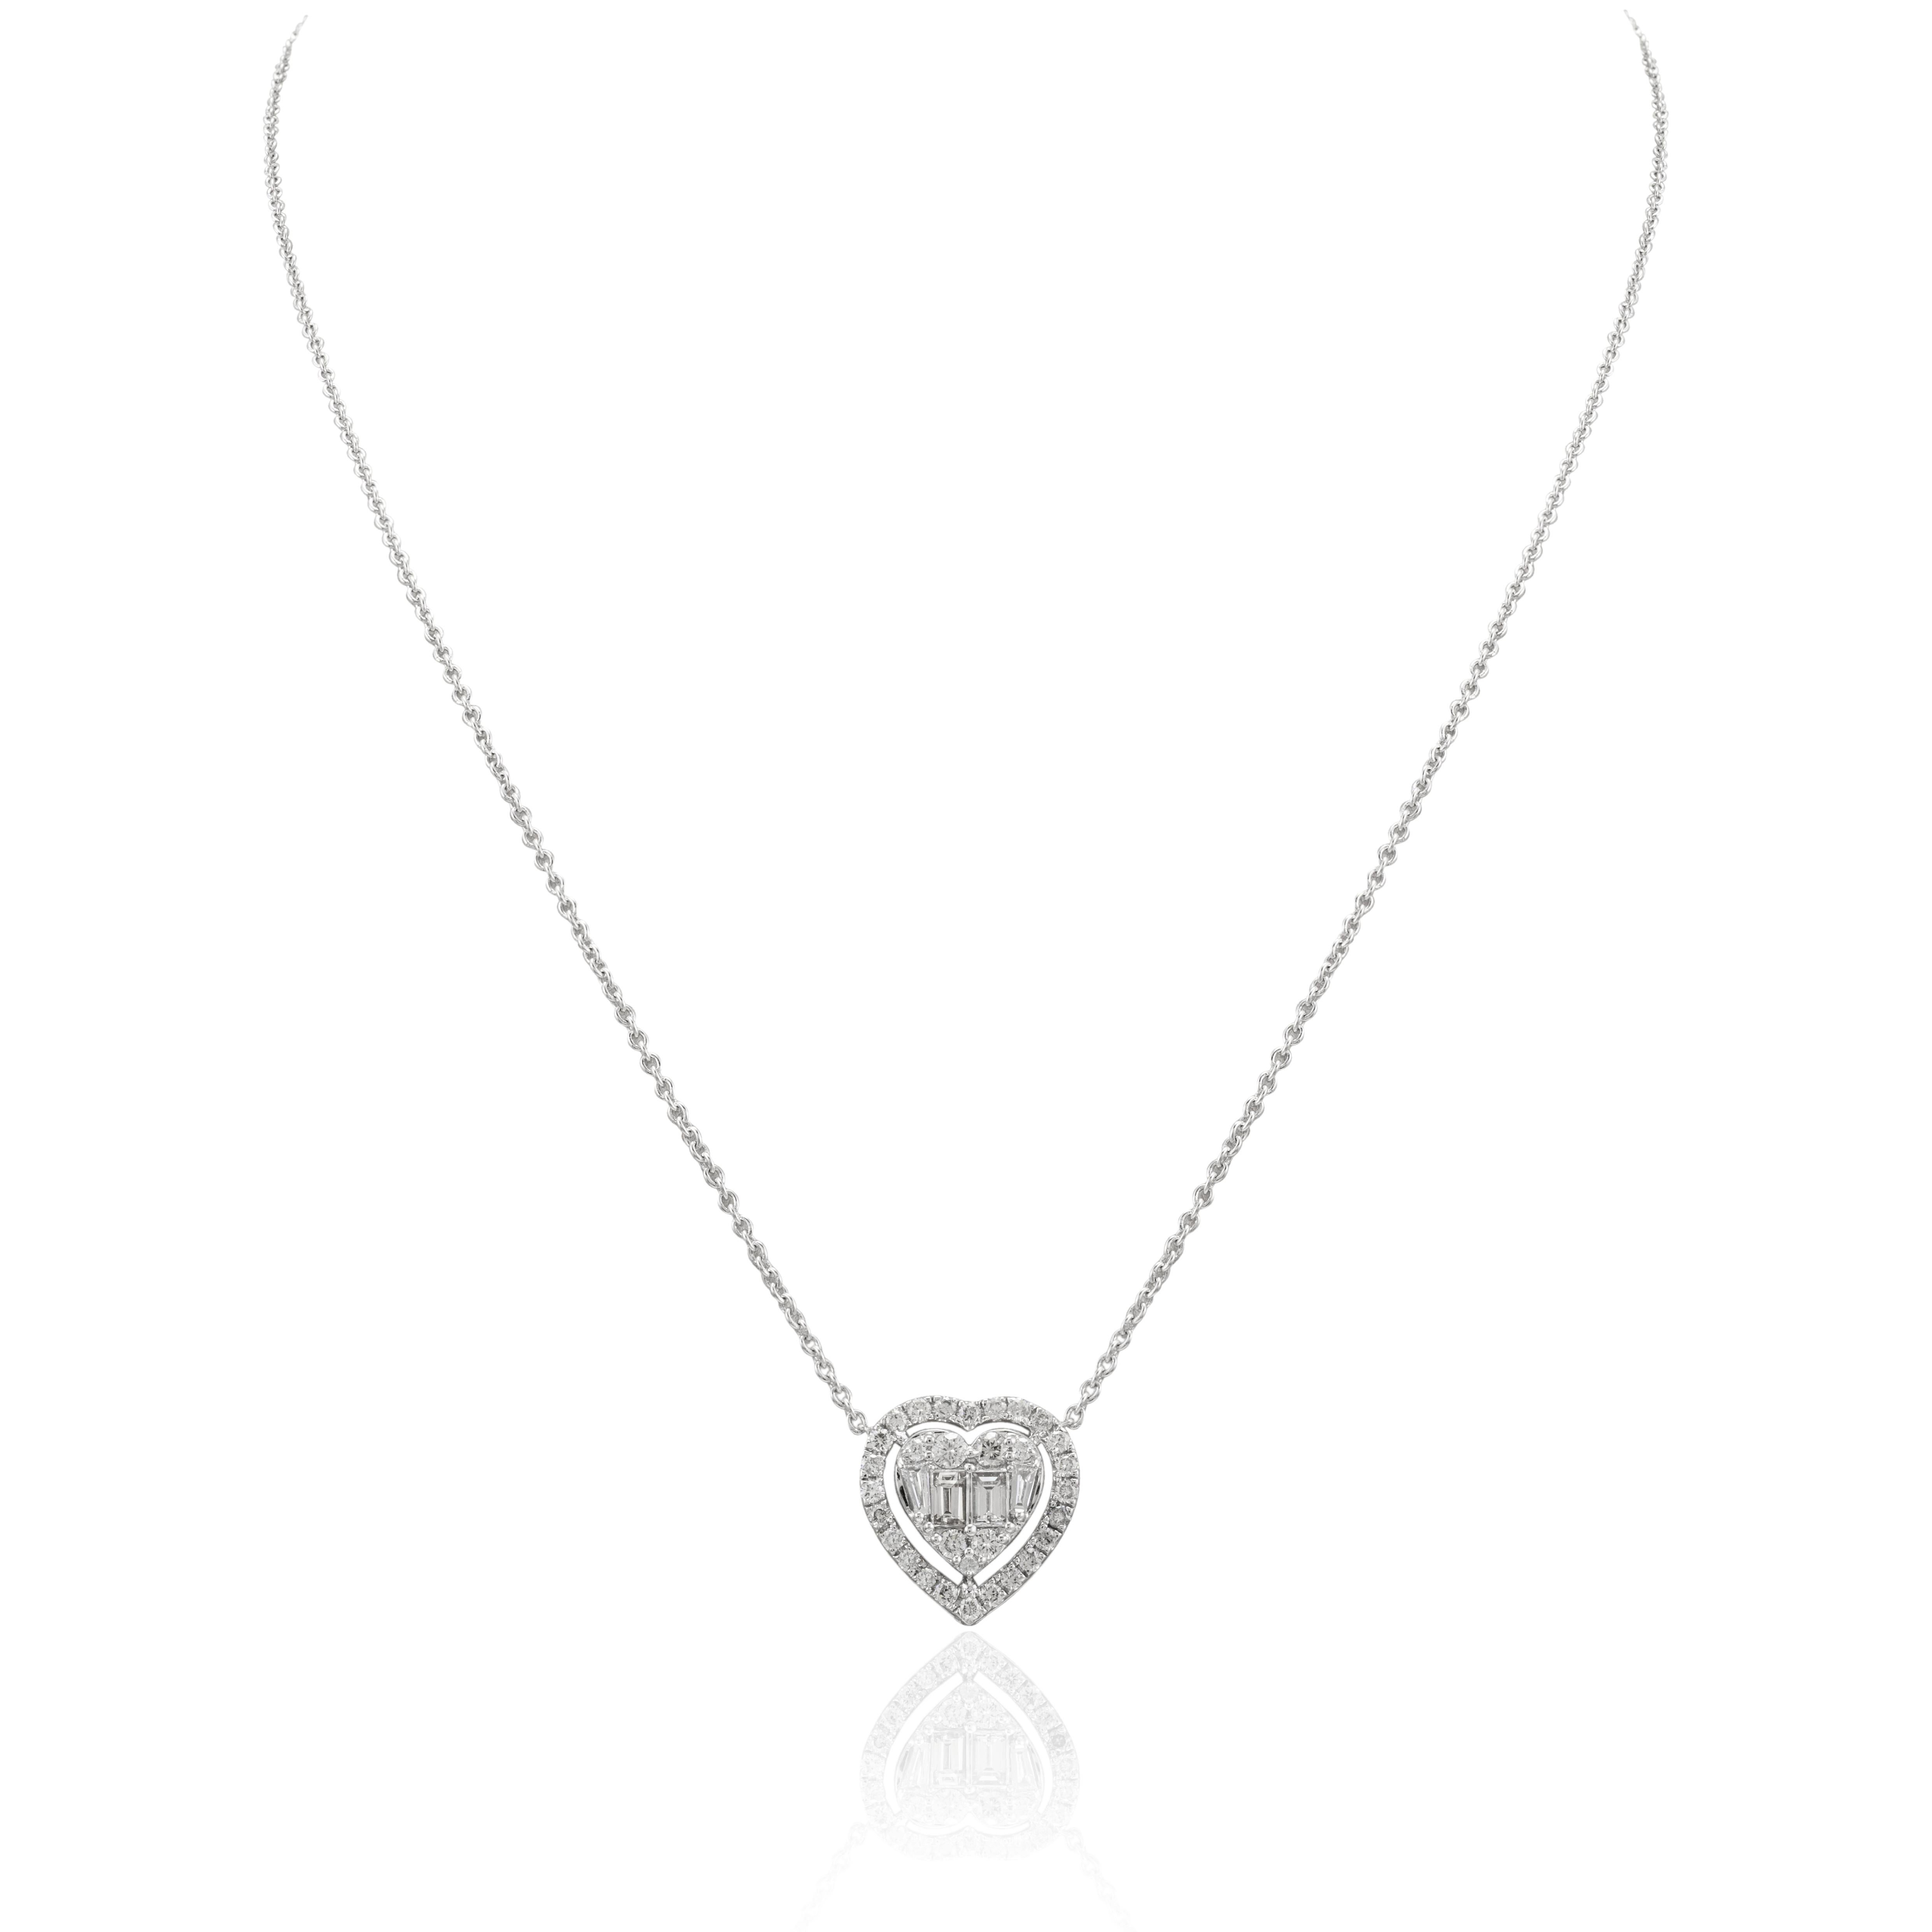 Heart Diamond Pendant Necklace 18k Solid White Gold, Gift For Her Christmas In New Condition For Sale In Houston, TX